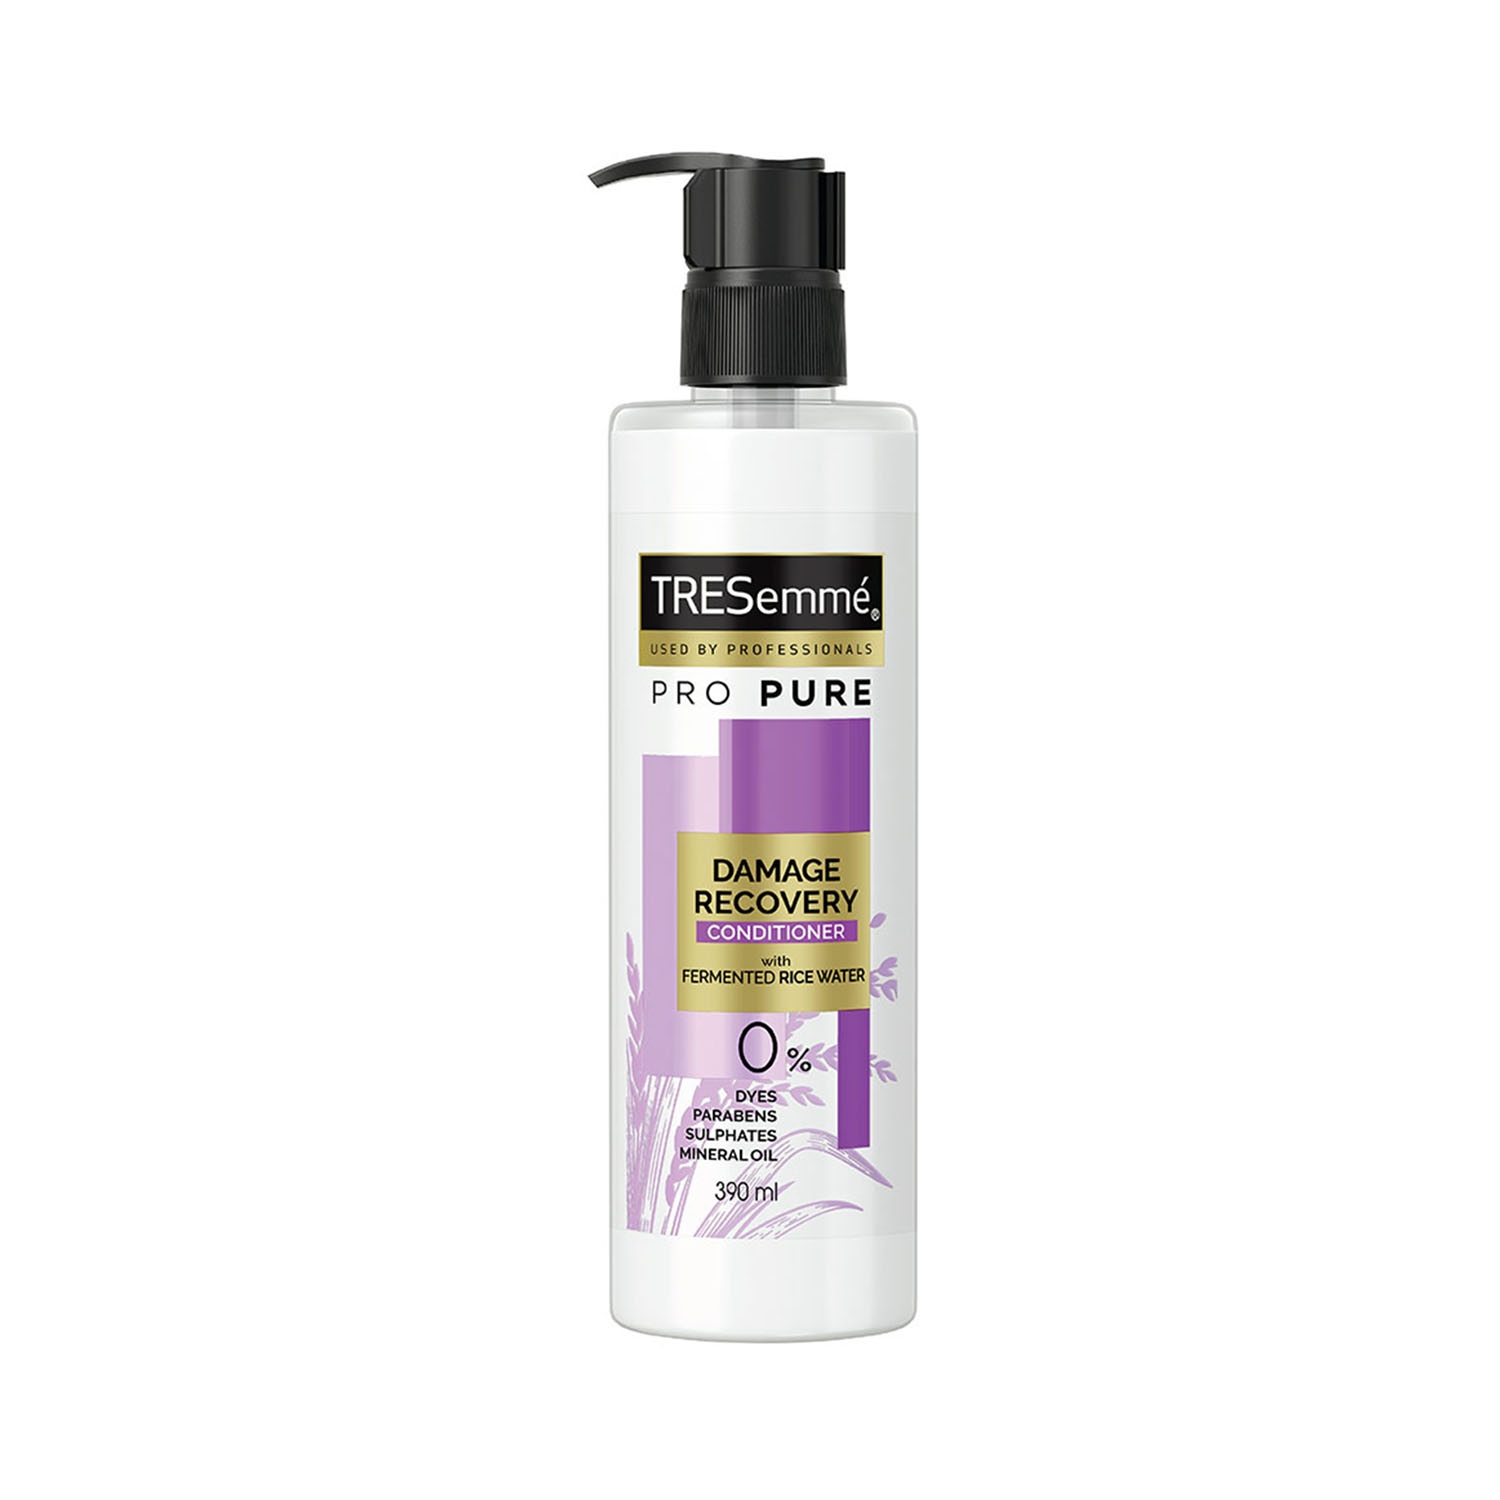 Tresemme | Tresemme Pro Pure Damage Recovery Conditioner (390ml)